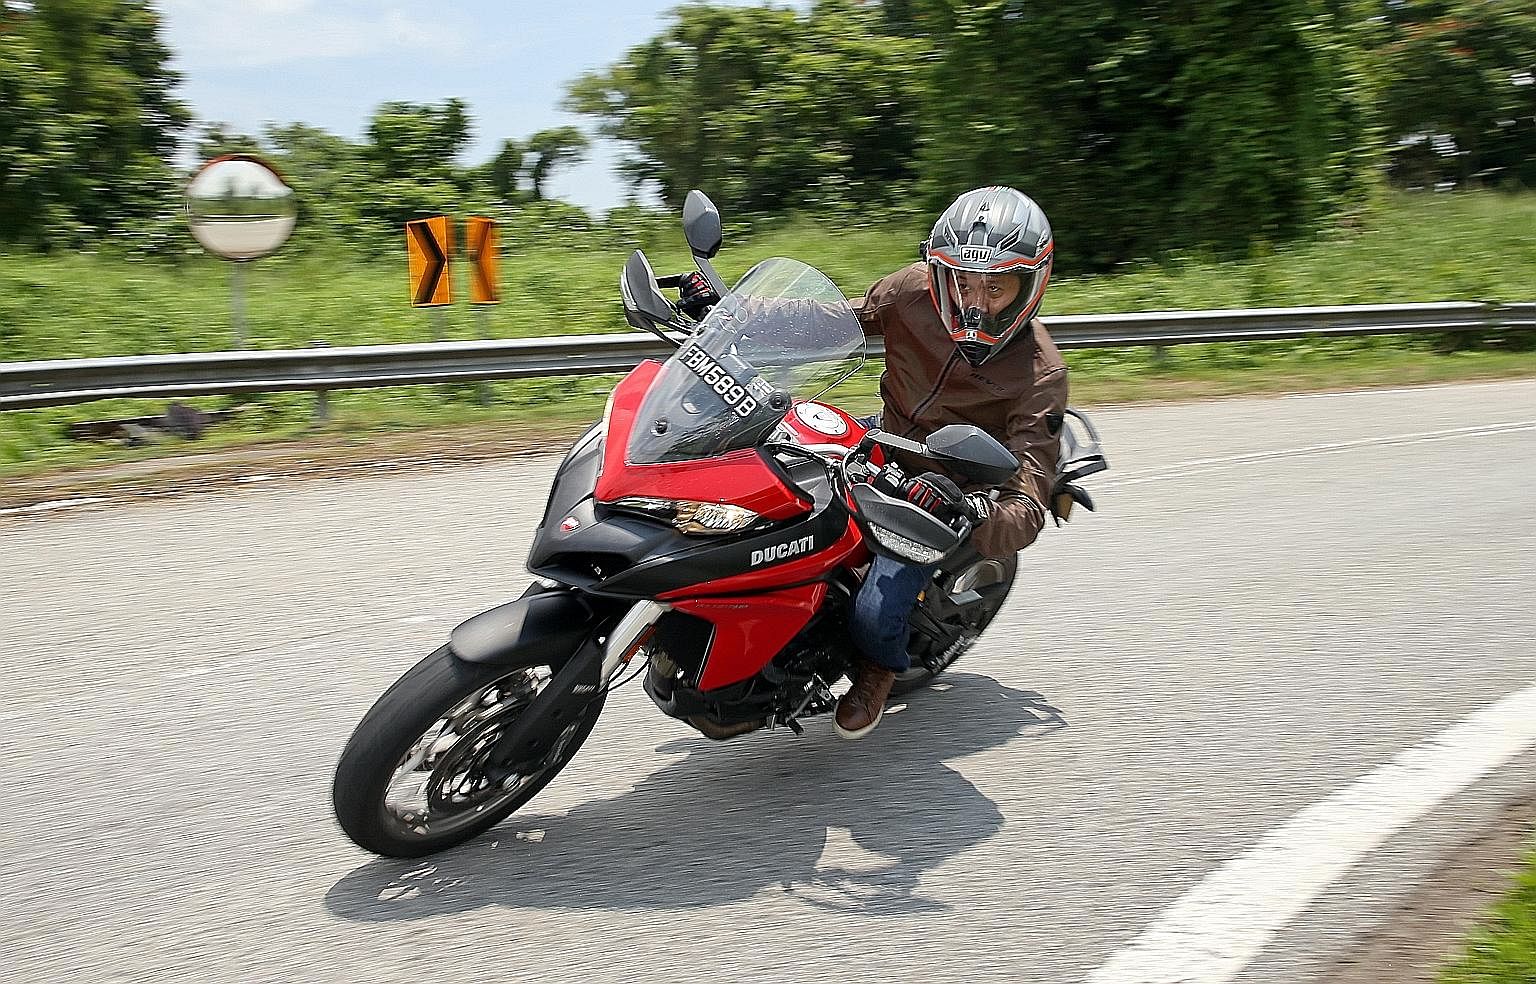 The 950 is a bike which allows the rider to negotiate corners by leaning with the machine or tipping its handlebars while keeping the body upright.